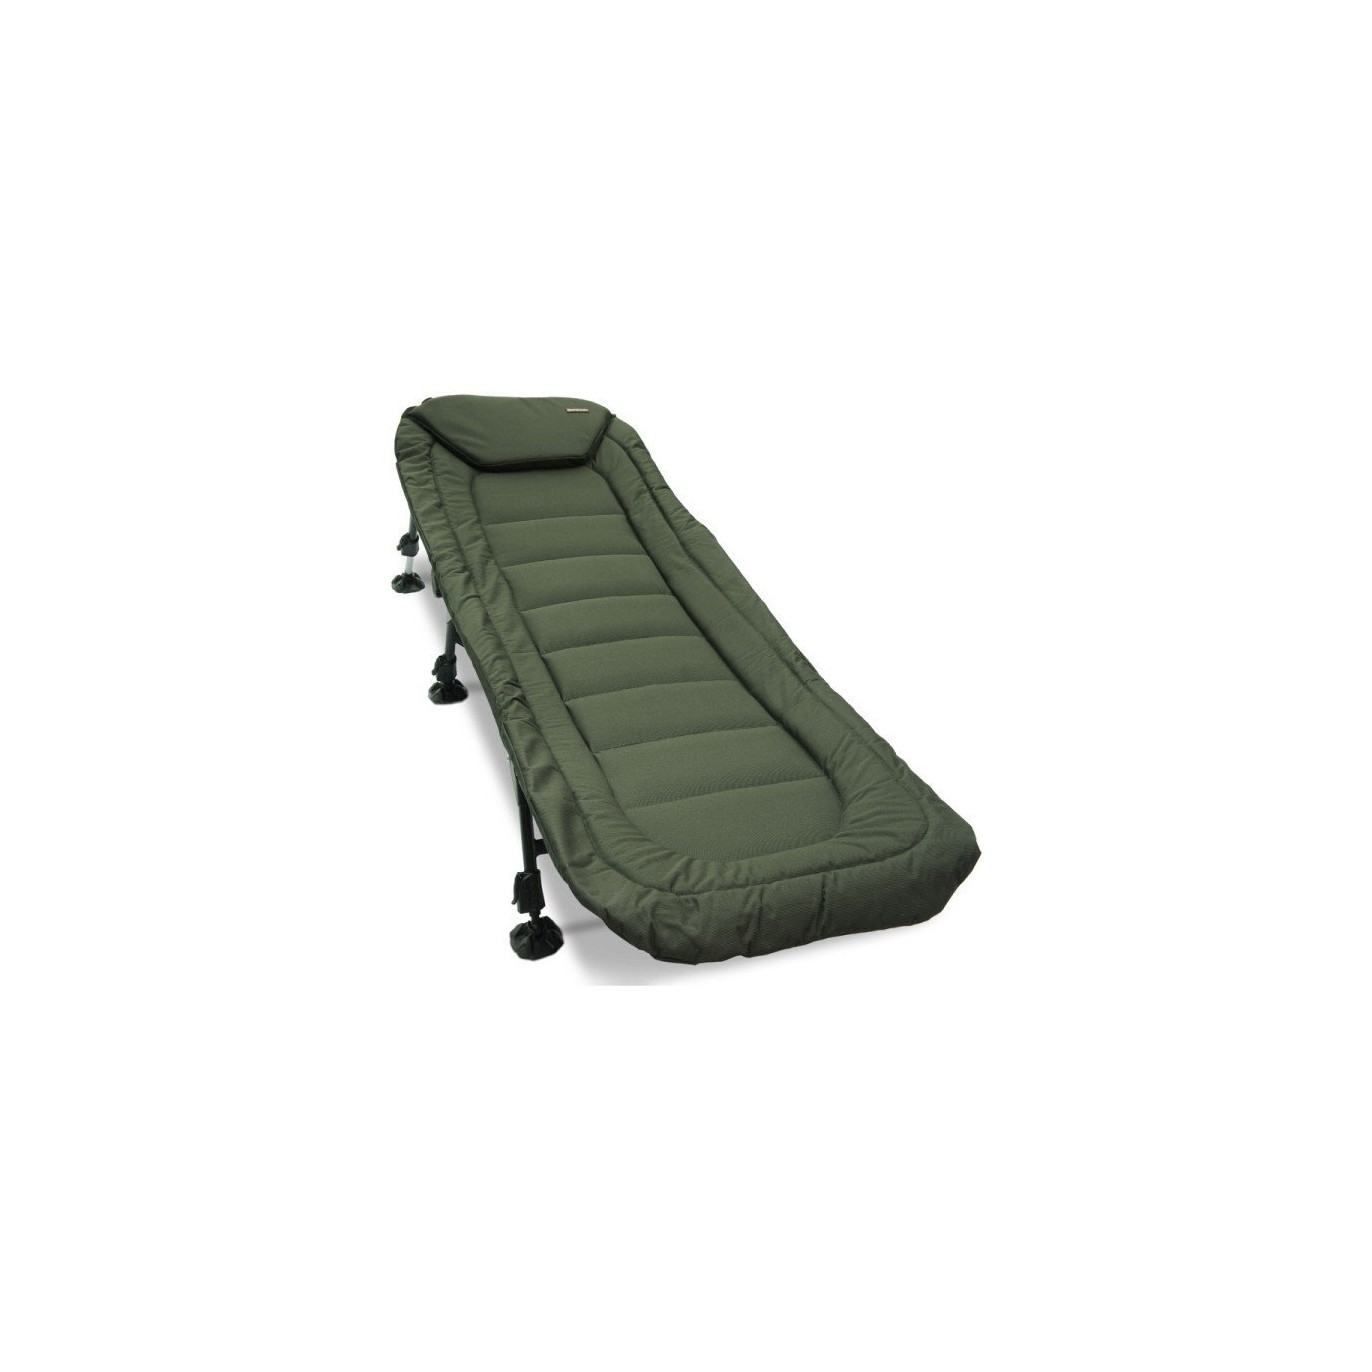 bed chair classic no reclinable ngt